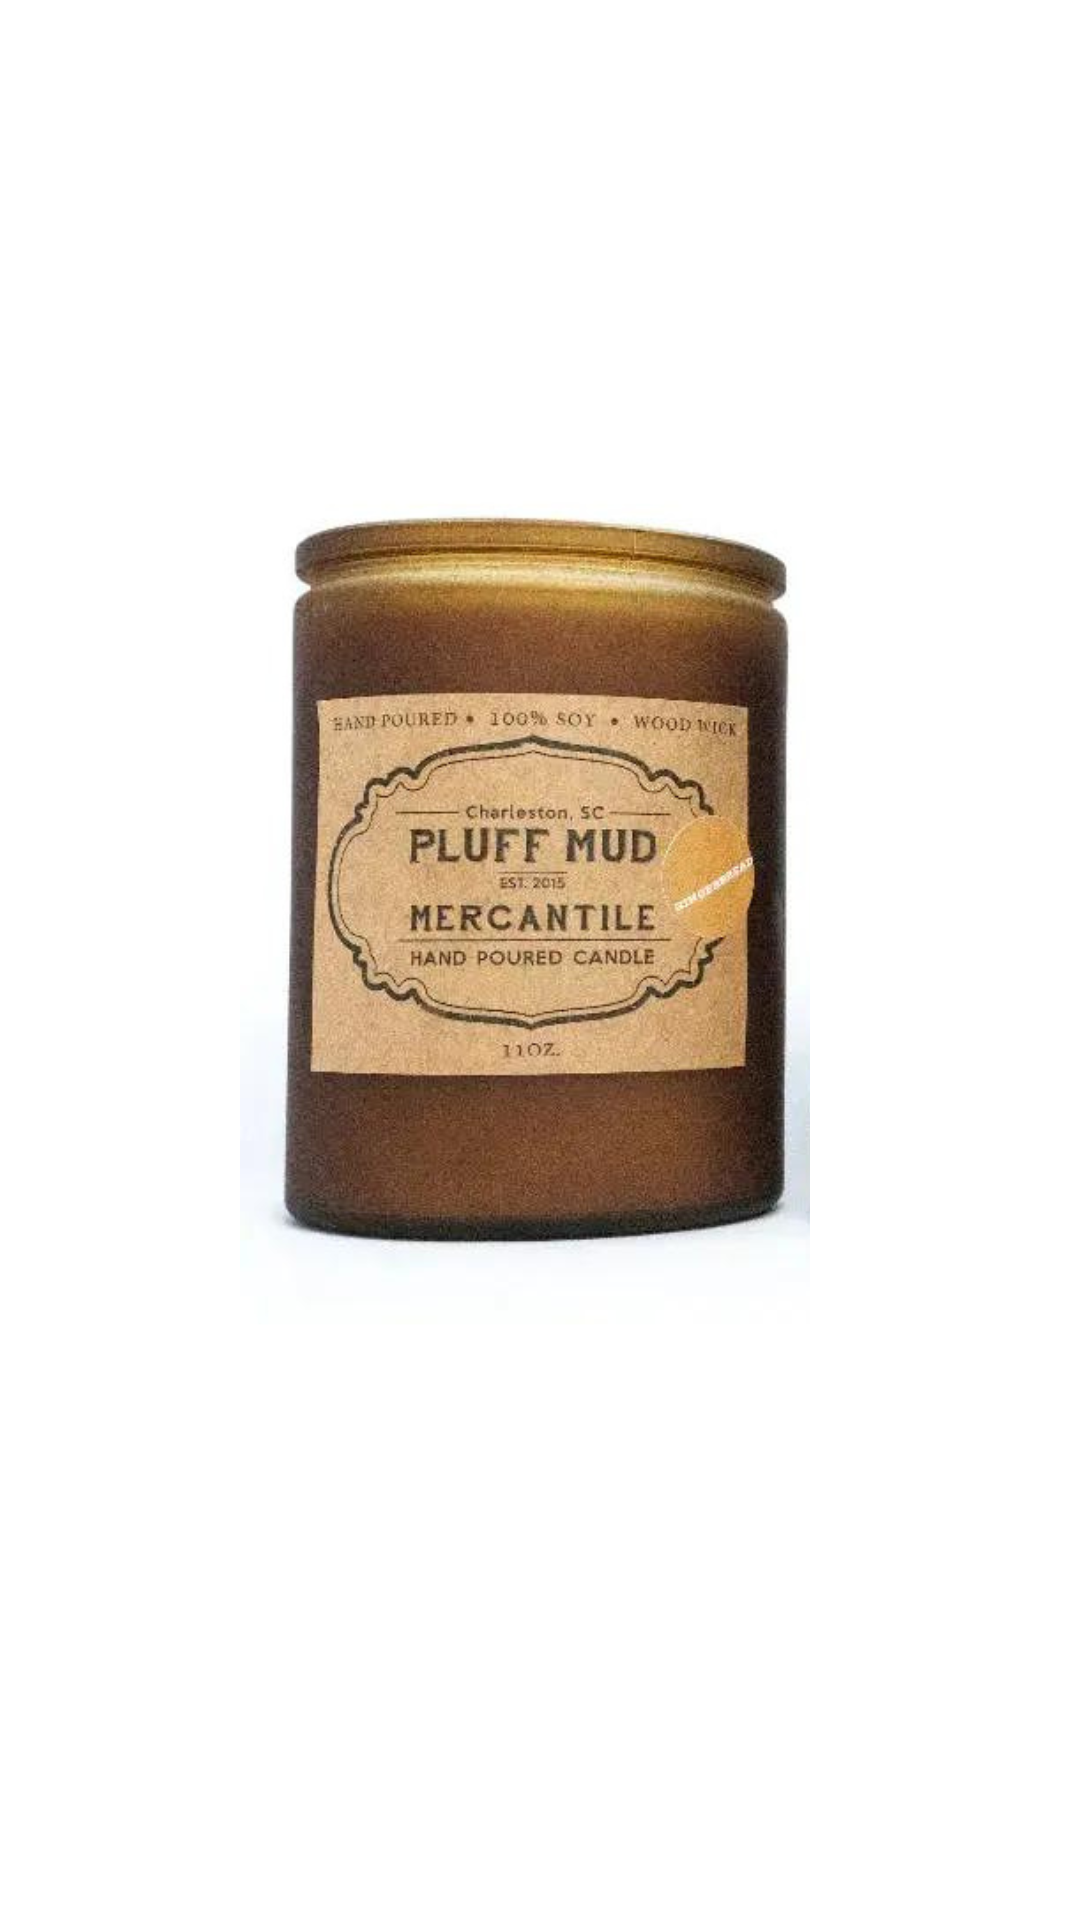 Hurricane Hand Poured Soy Candle - Pluff Mud Mercantile